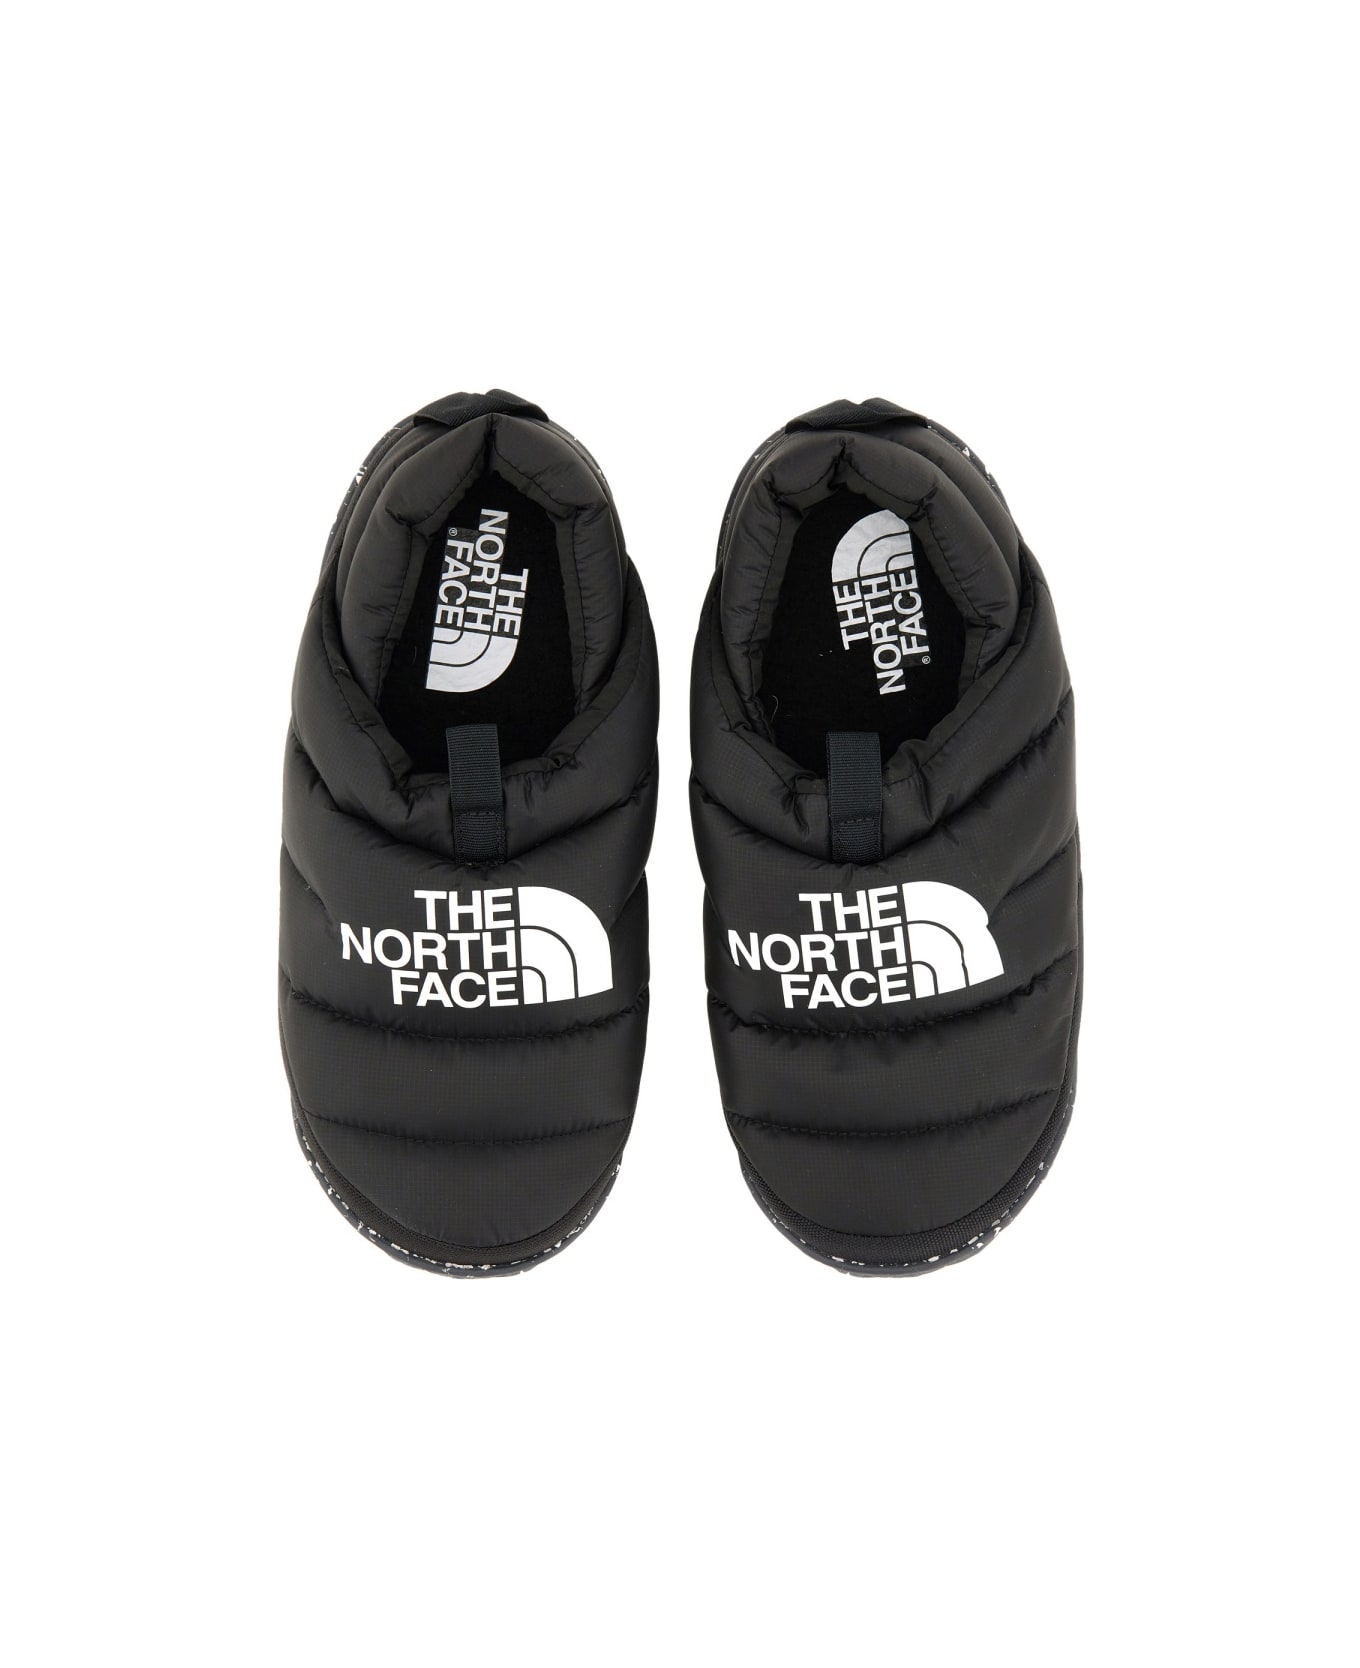 The North Face Padded Shoe - BLACK